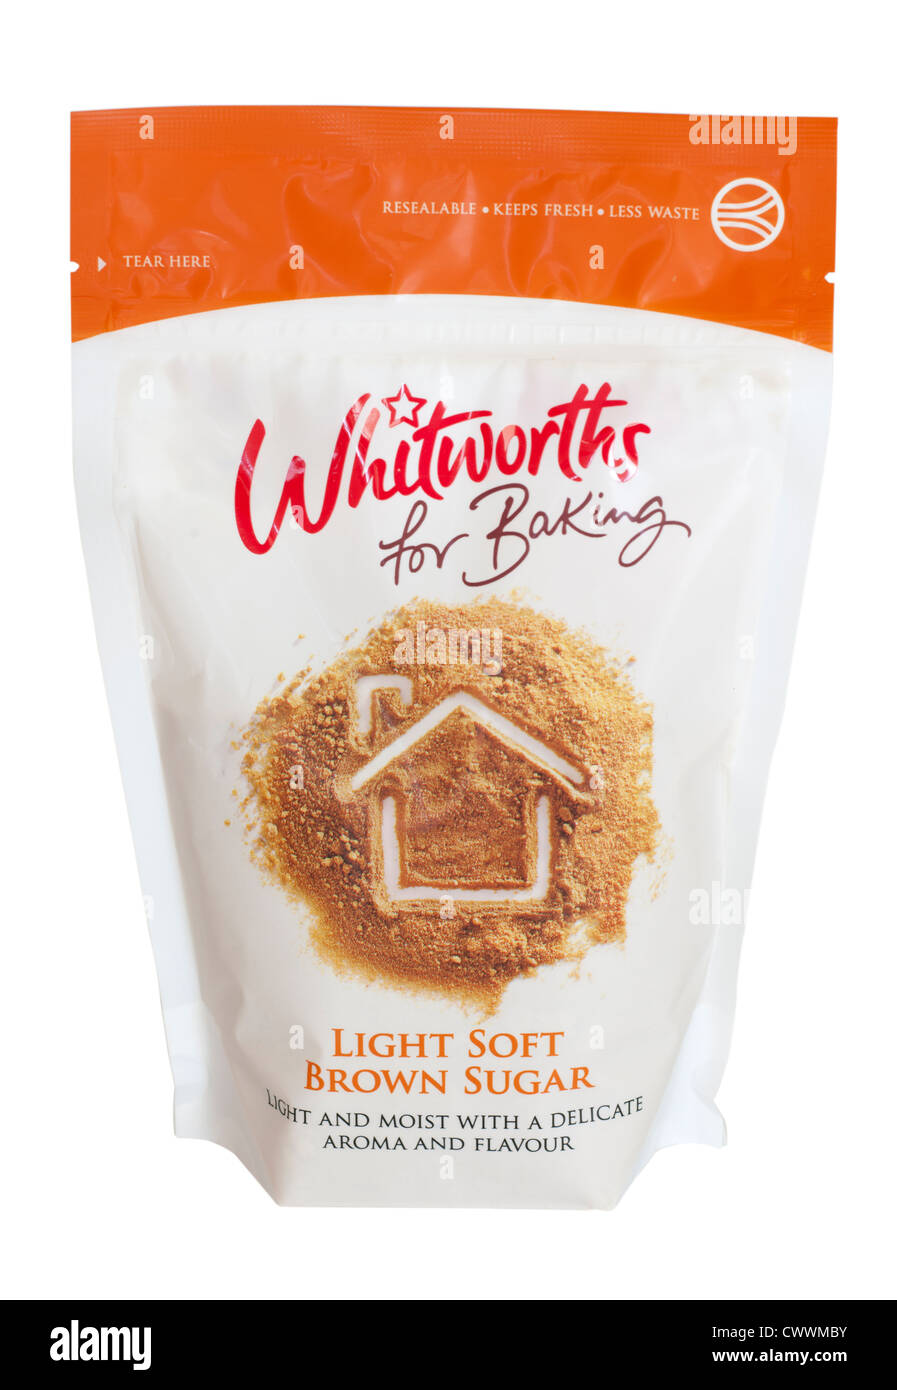 Whitworths light soft brown sugar for baking in a resealable bag Stock Photo